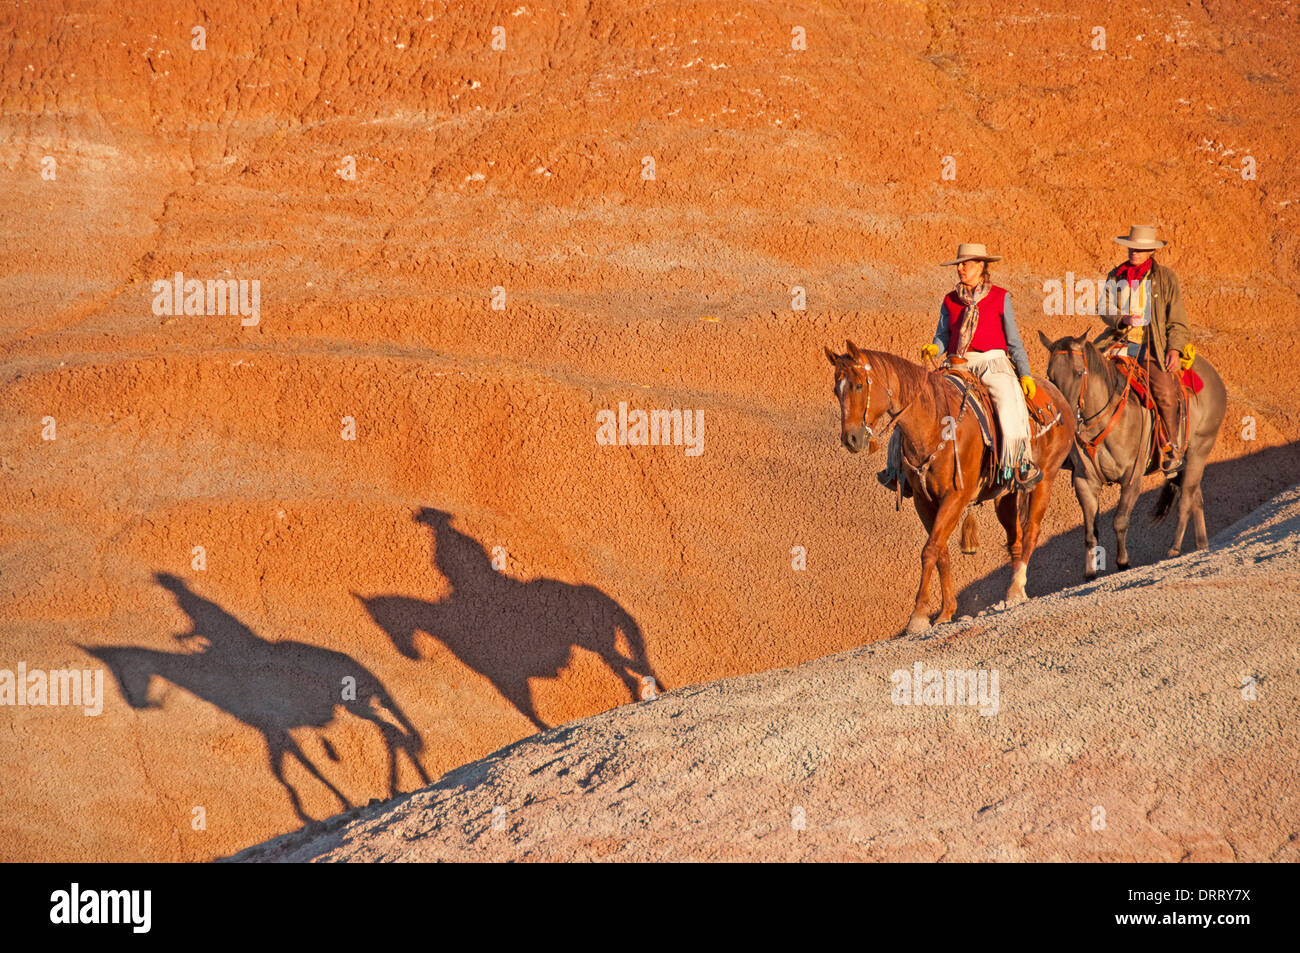 https://c8.alamy.com/comp/DRRY7X/a-cowgirl-and-cowboy-ride-their-horses-in-the-painted-hills-area-of-DRRY7X.jpg